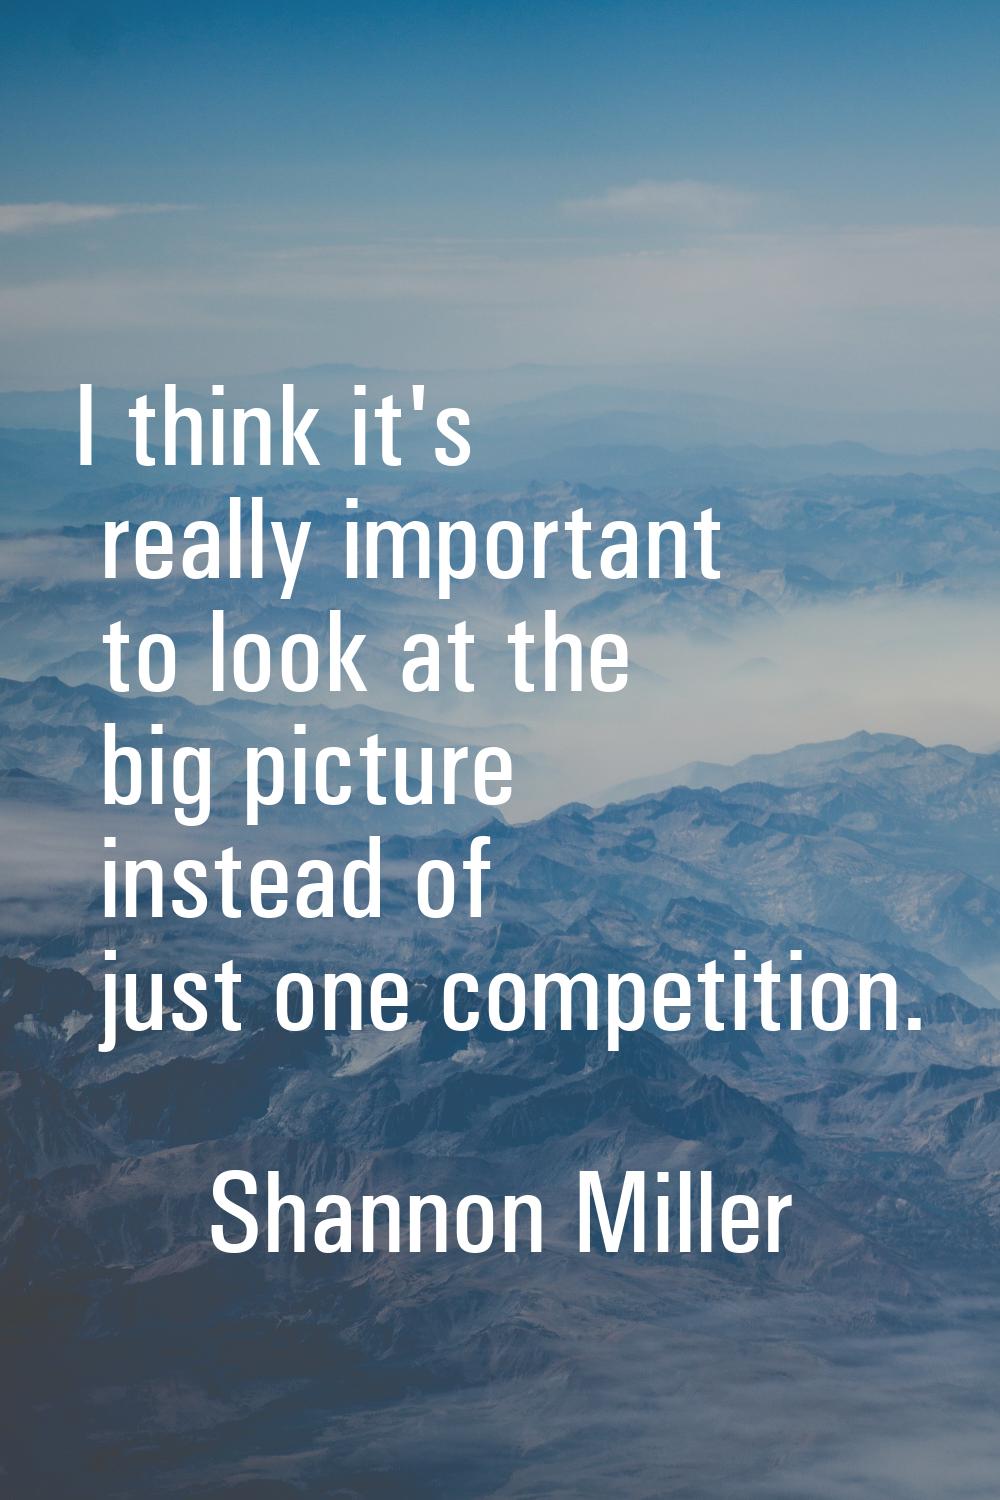 I think it's really important to look at the big picture instead of just one competition.